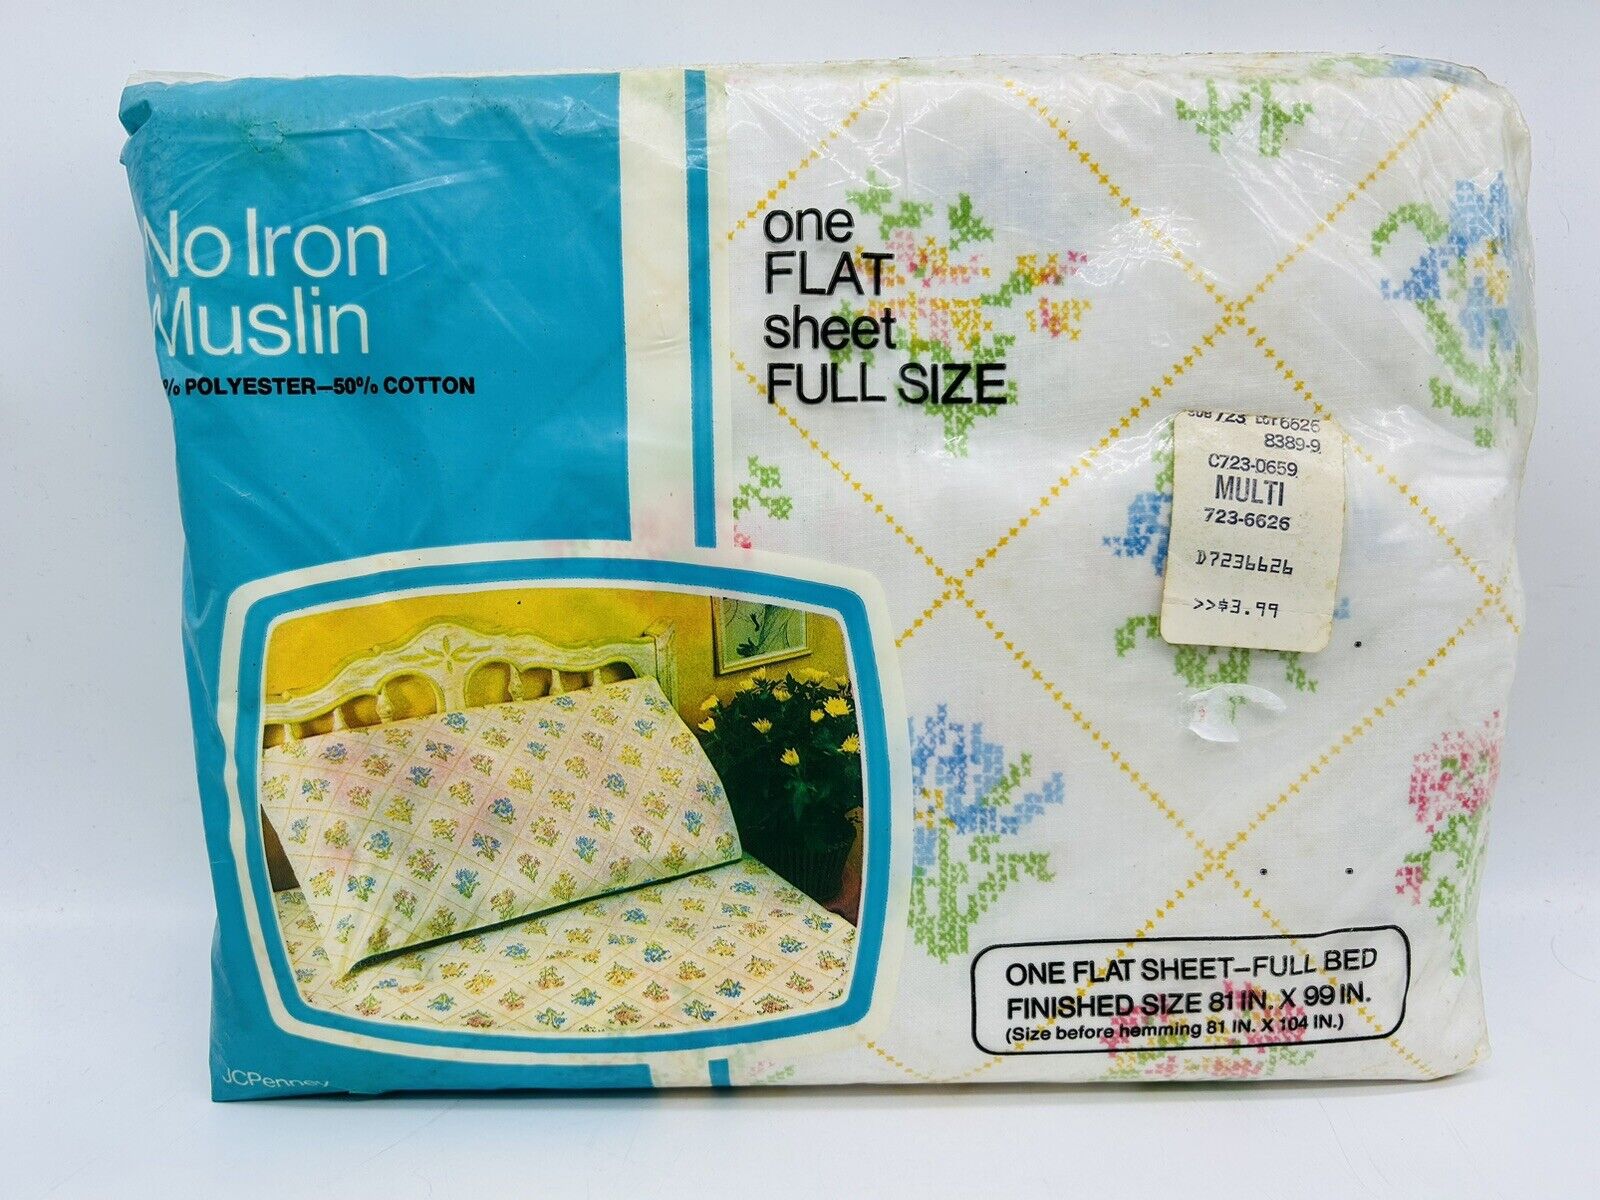 JCPenney Vintage Full Flat Sheet Floral Cross Stitch No Iron Muslin 54x75 NOS